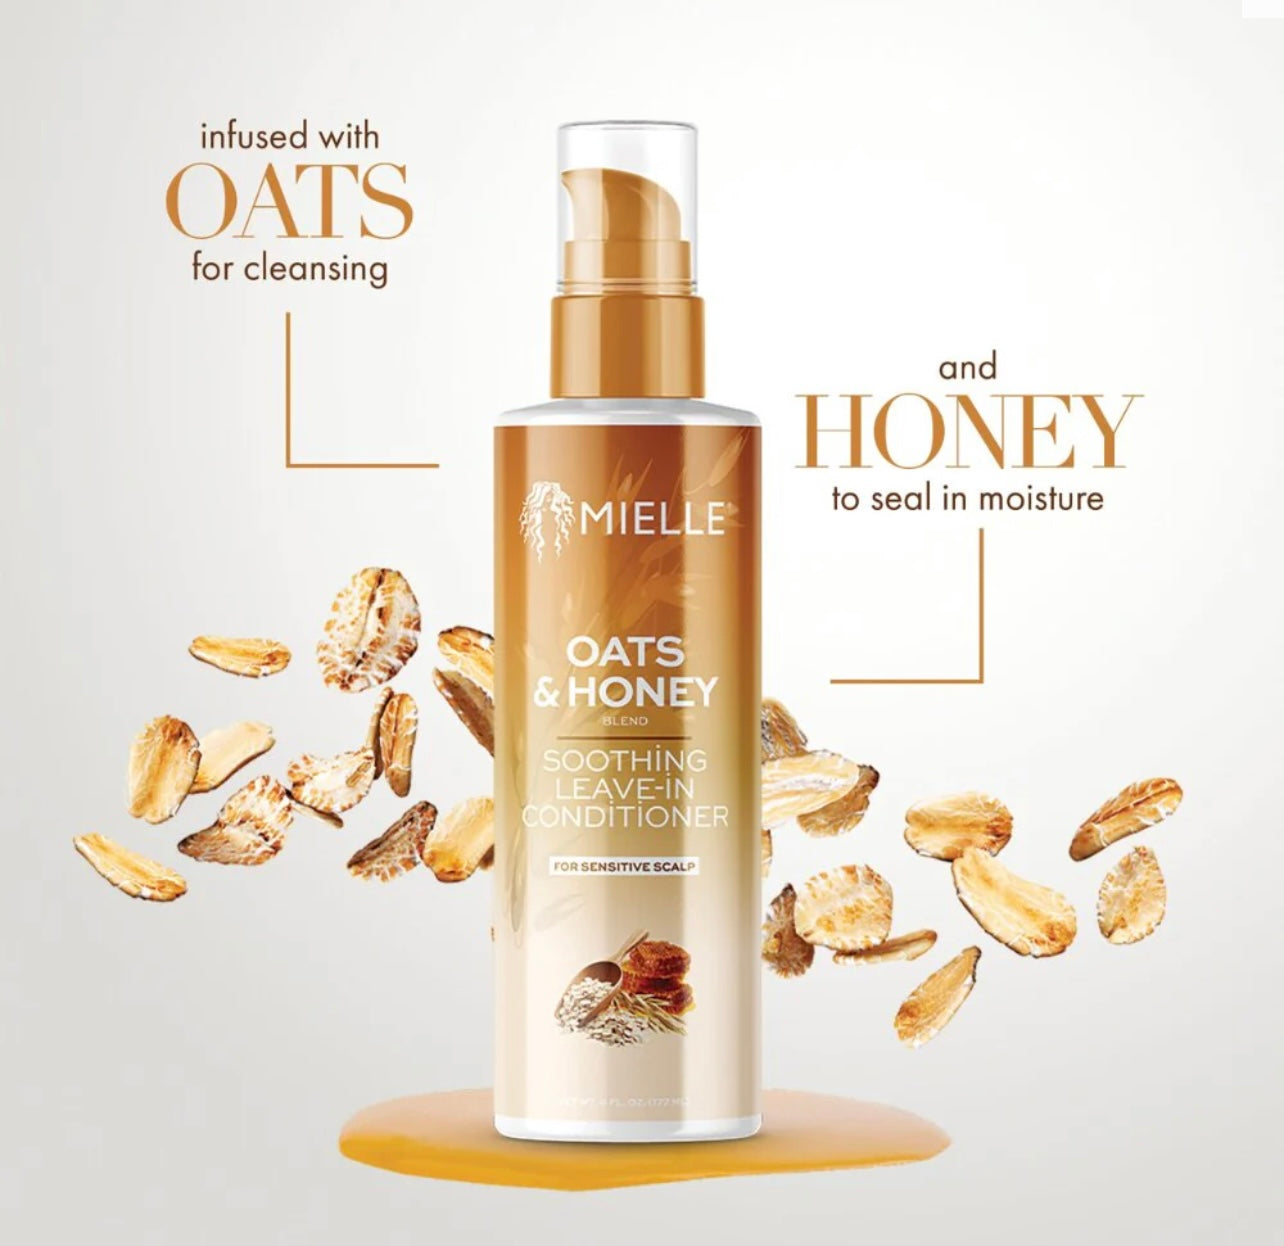 Oats & Honey Soothing Leave-In Conditioner